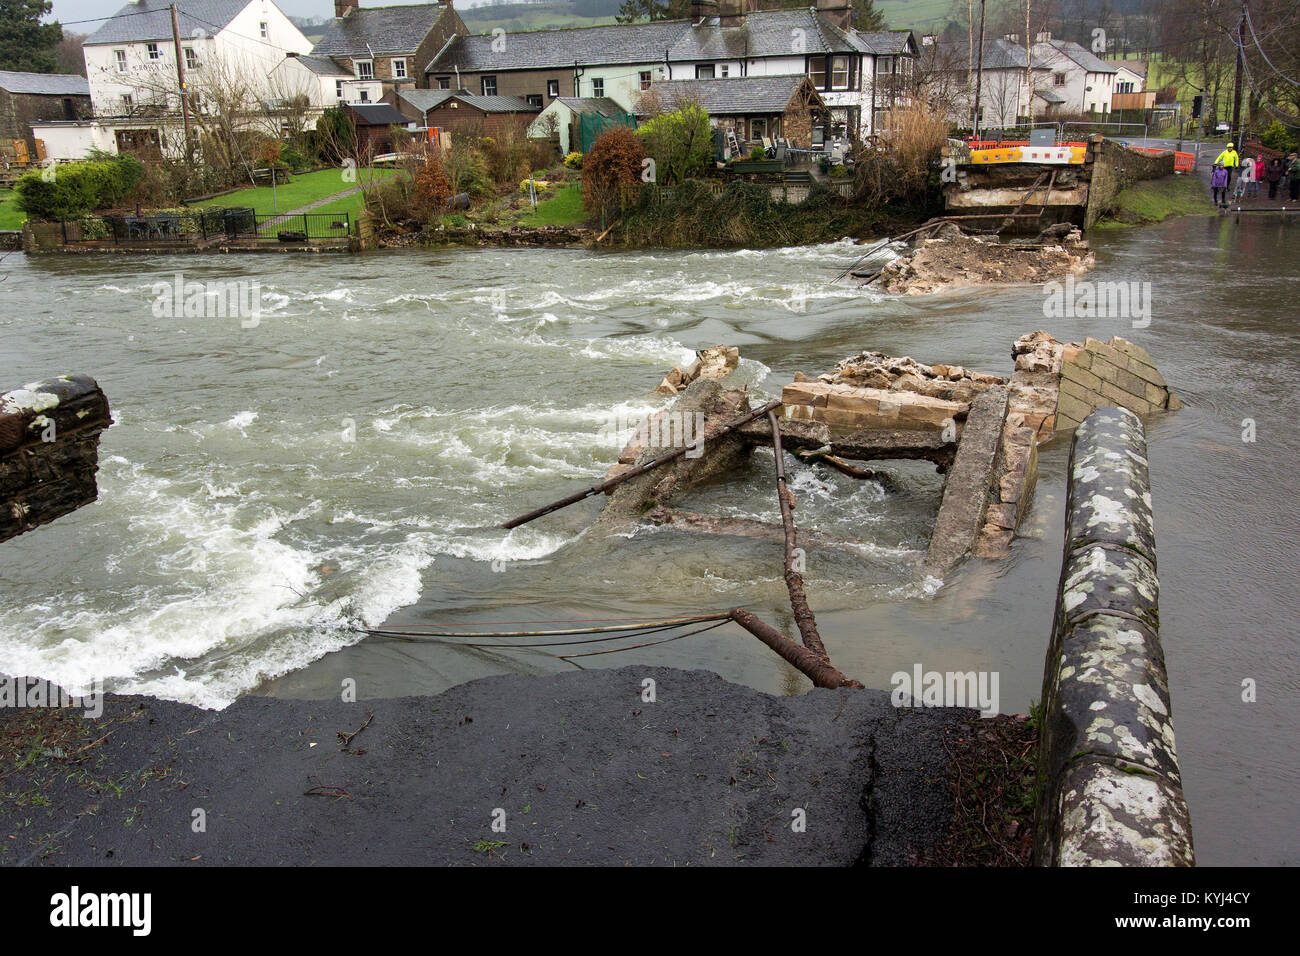 Remains of the 18th century bridge at Pooley Bridge, Cumbria, UK, washed away after Storm Desmond in December 2015. Stock Photo